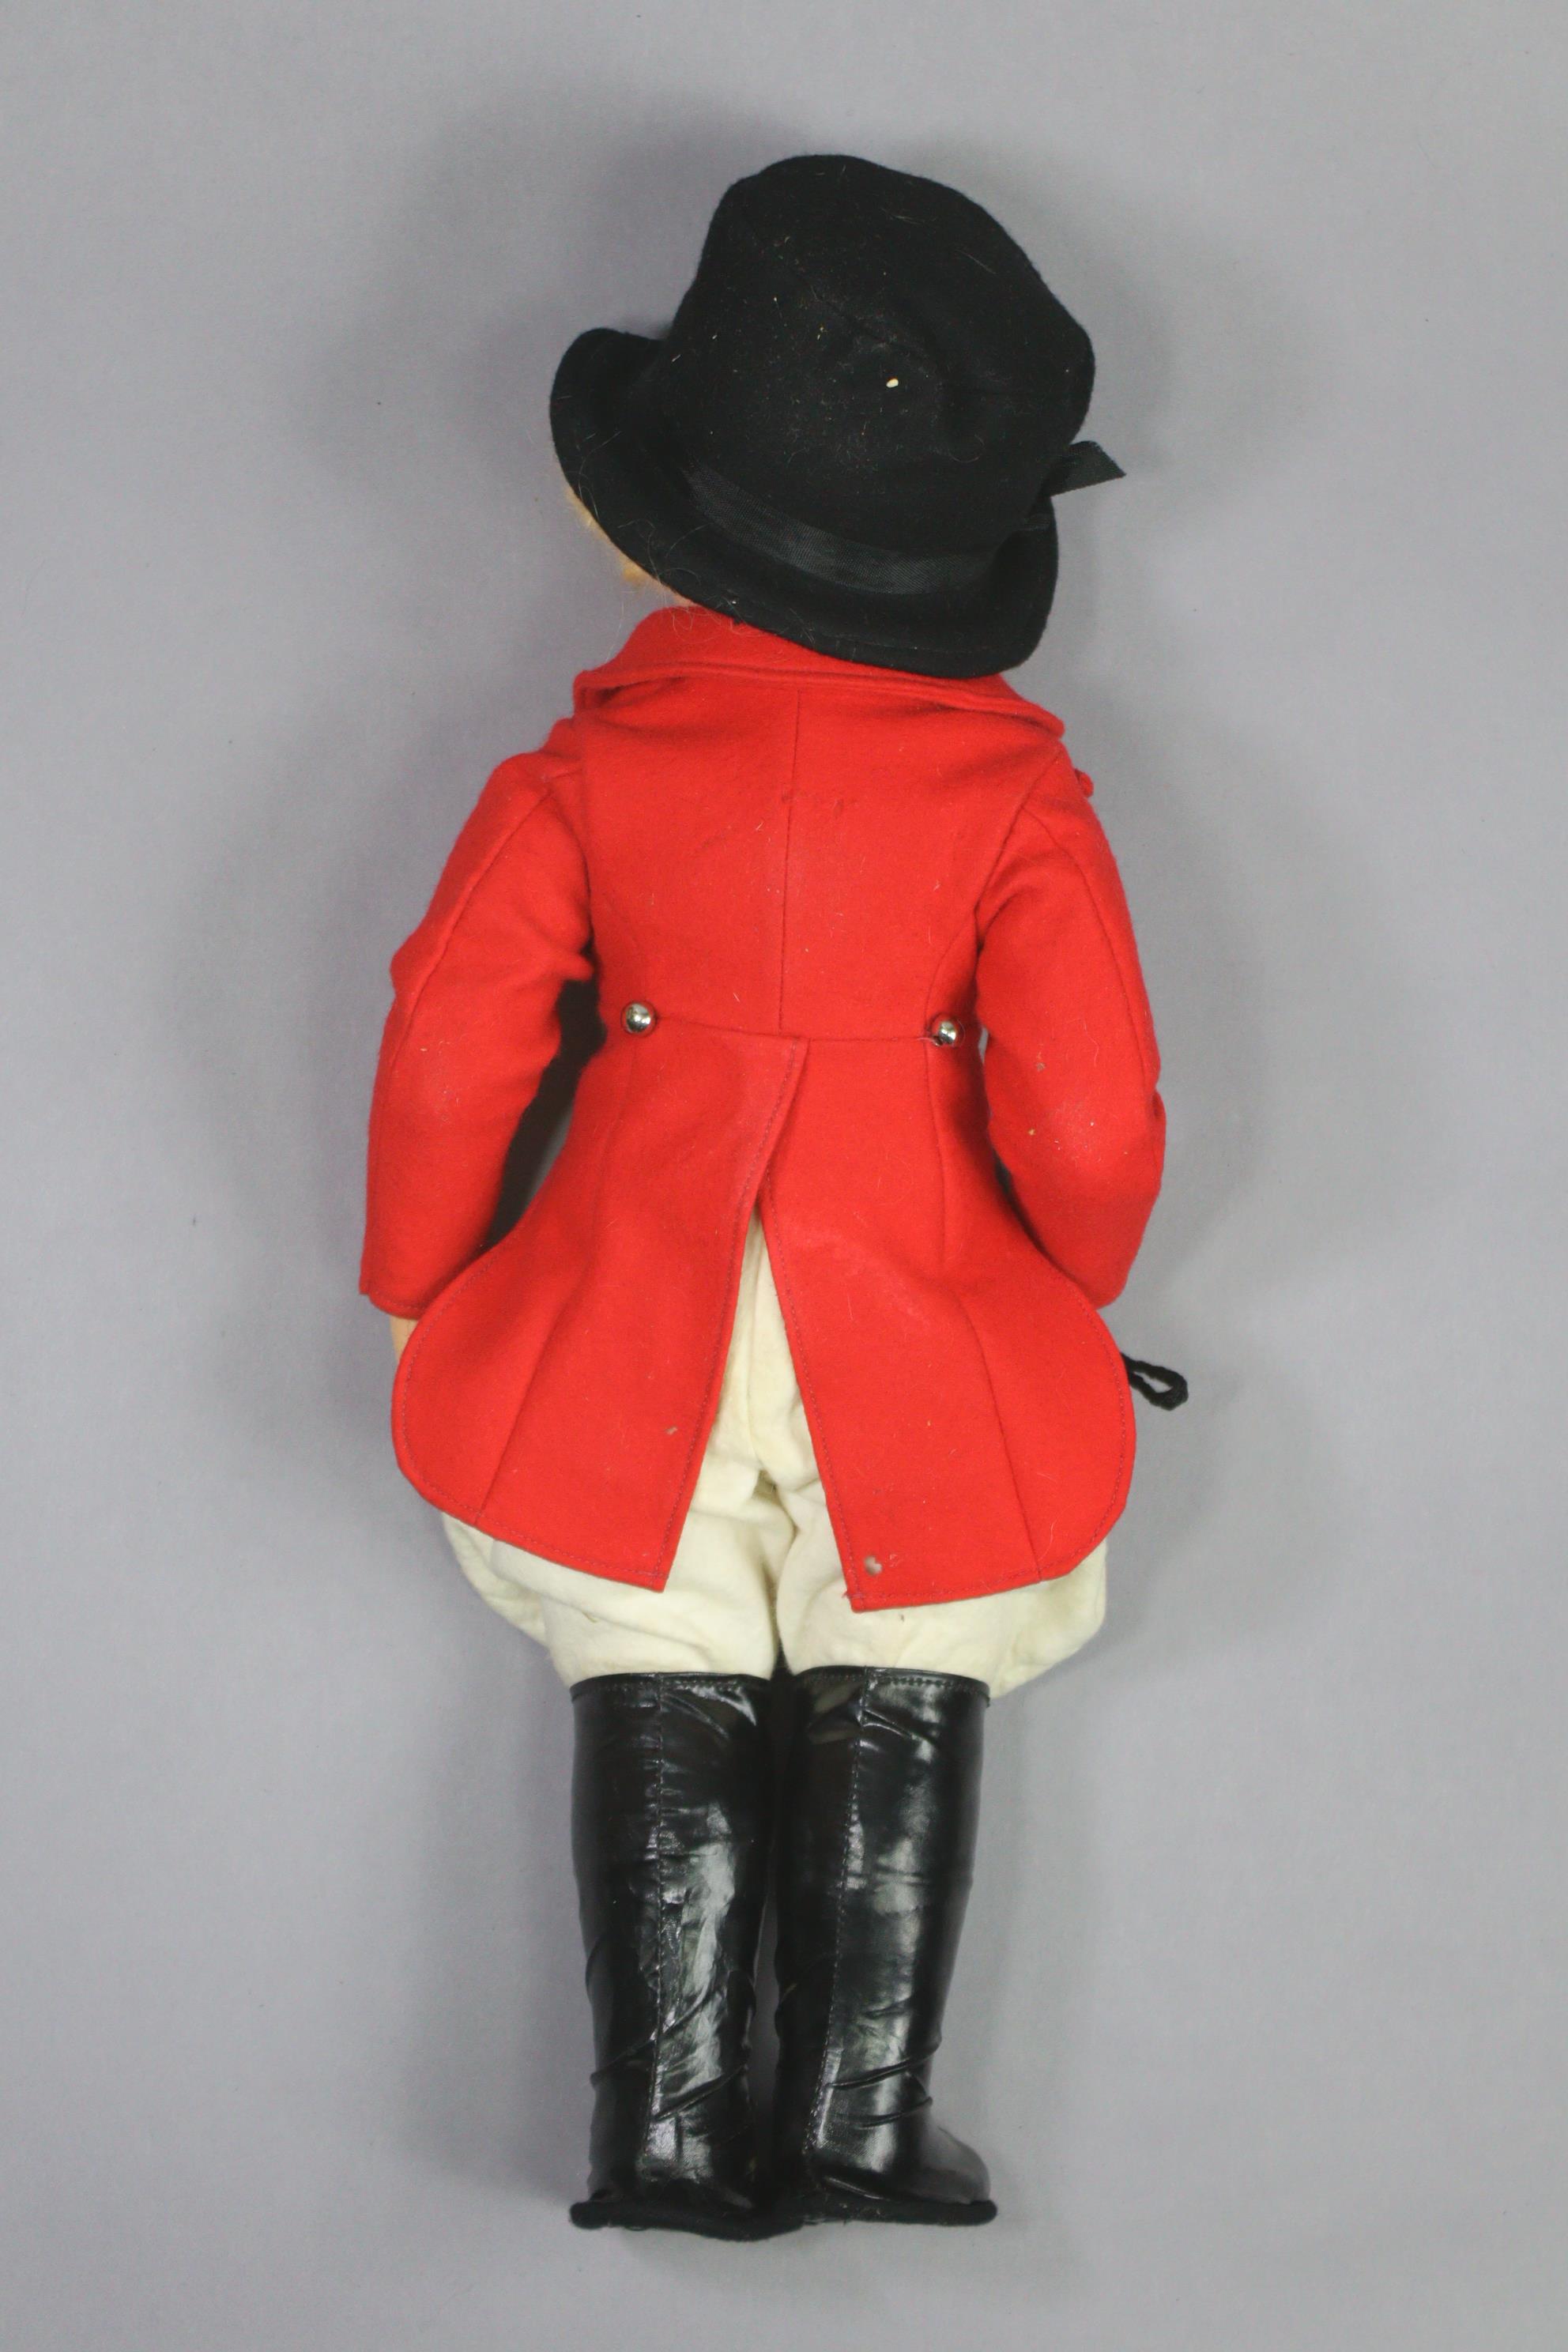 A 1930’s NORAH WELLINGS “RIDING GIRL” DOLL, 18” high, boxed (box w.a.f.). - Image 3 of 4